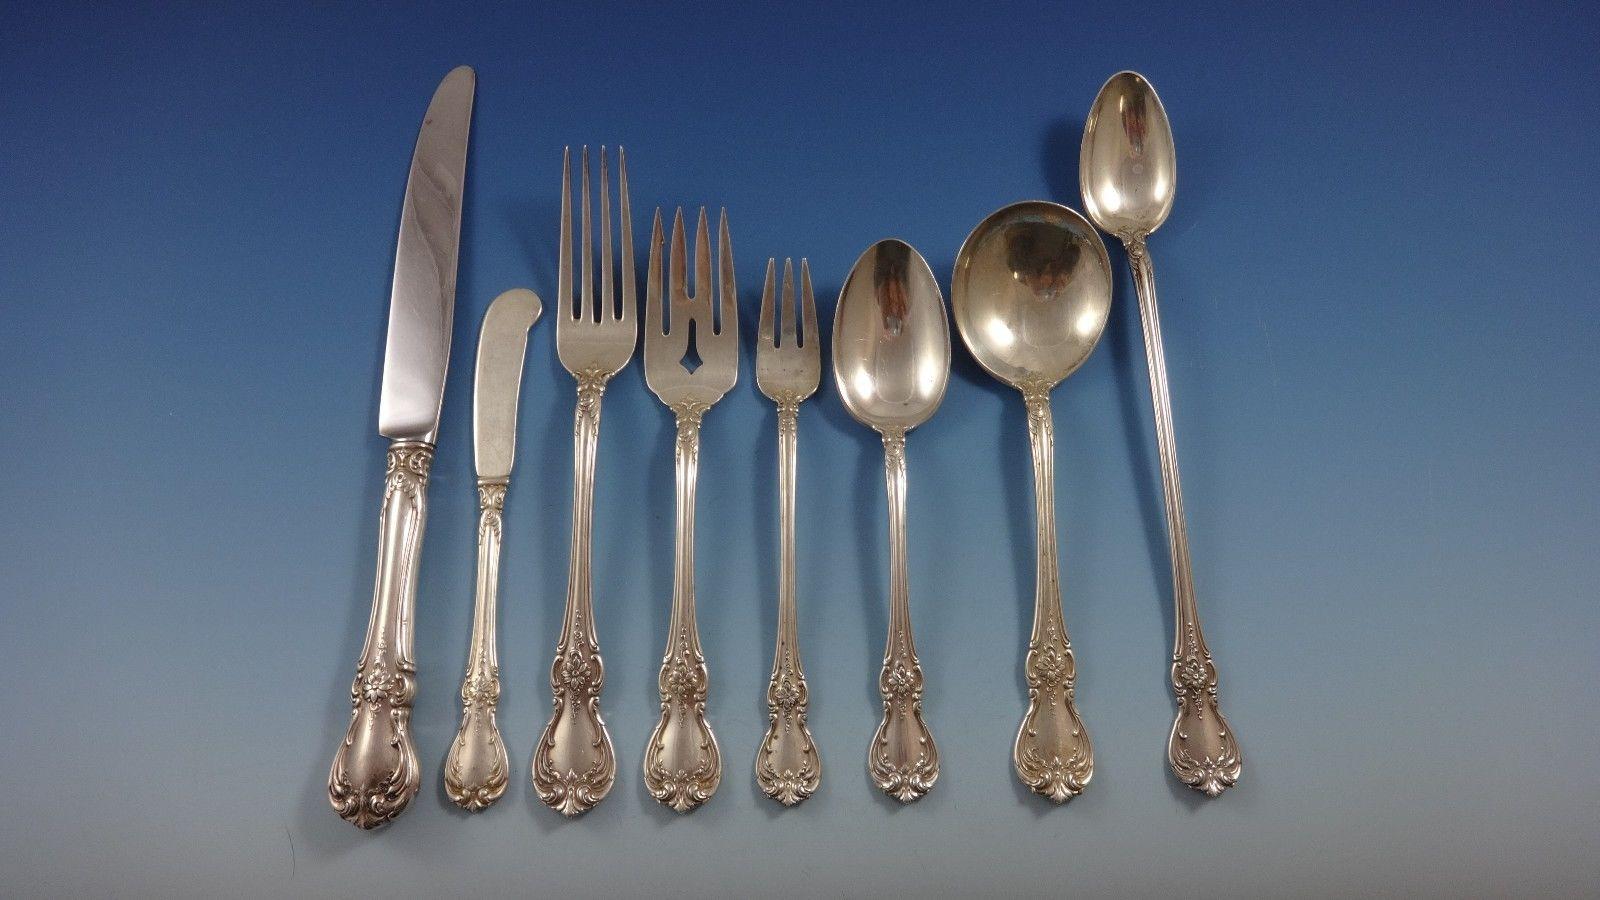 Old Master by Towle sterling silver flatware set, 73 pieces. This set includes:

8 Knives, 8 7/8